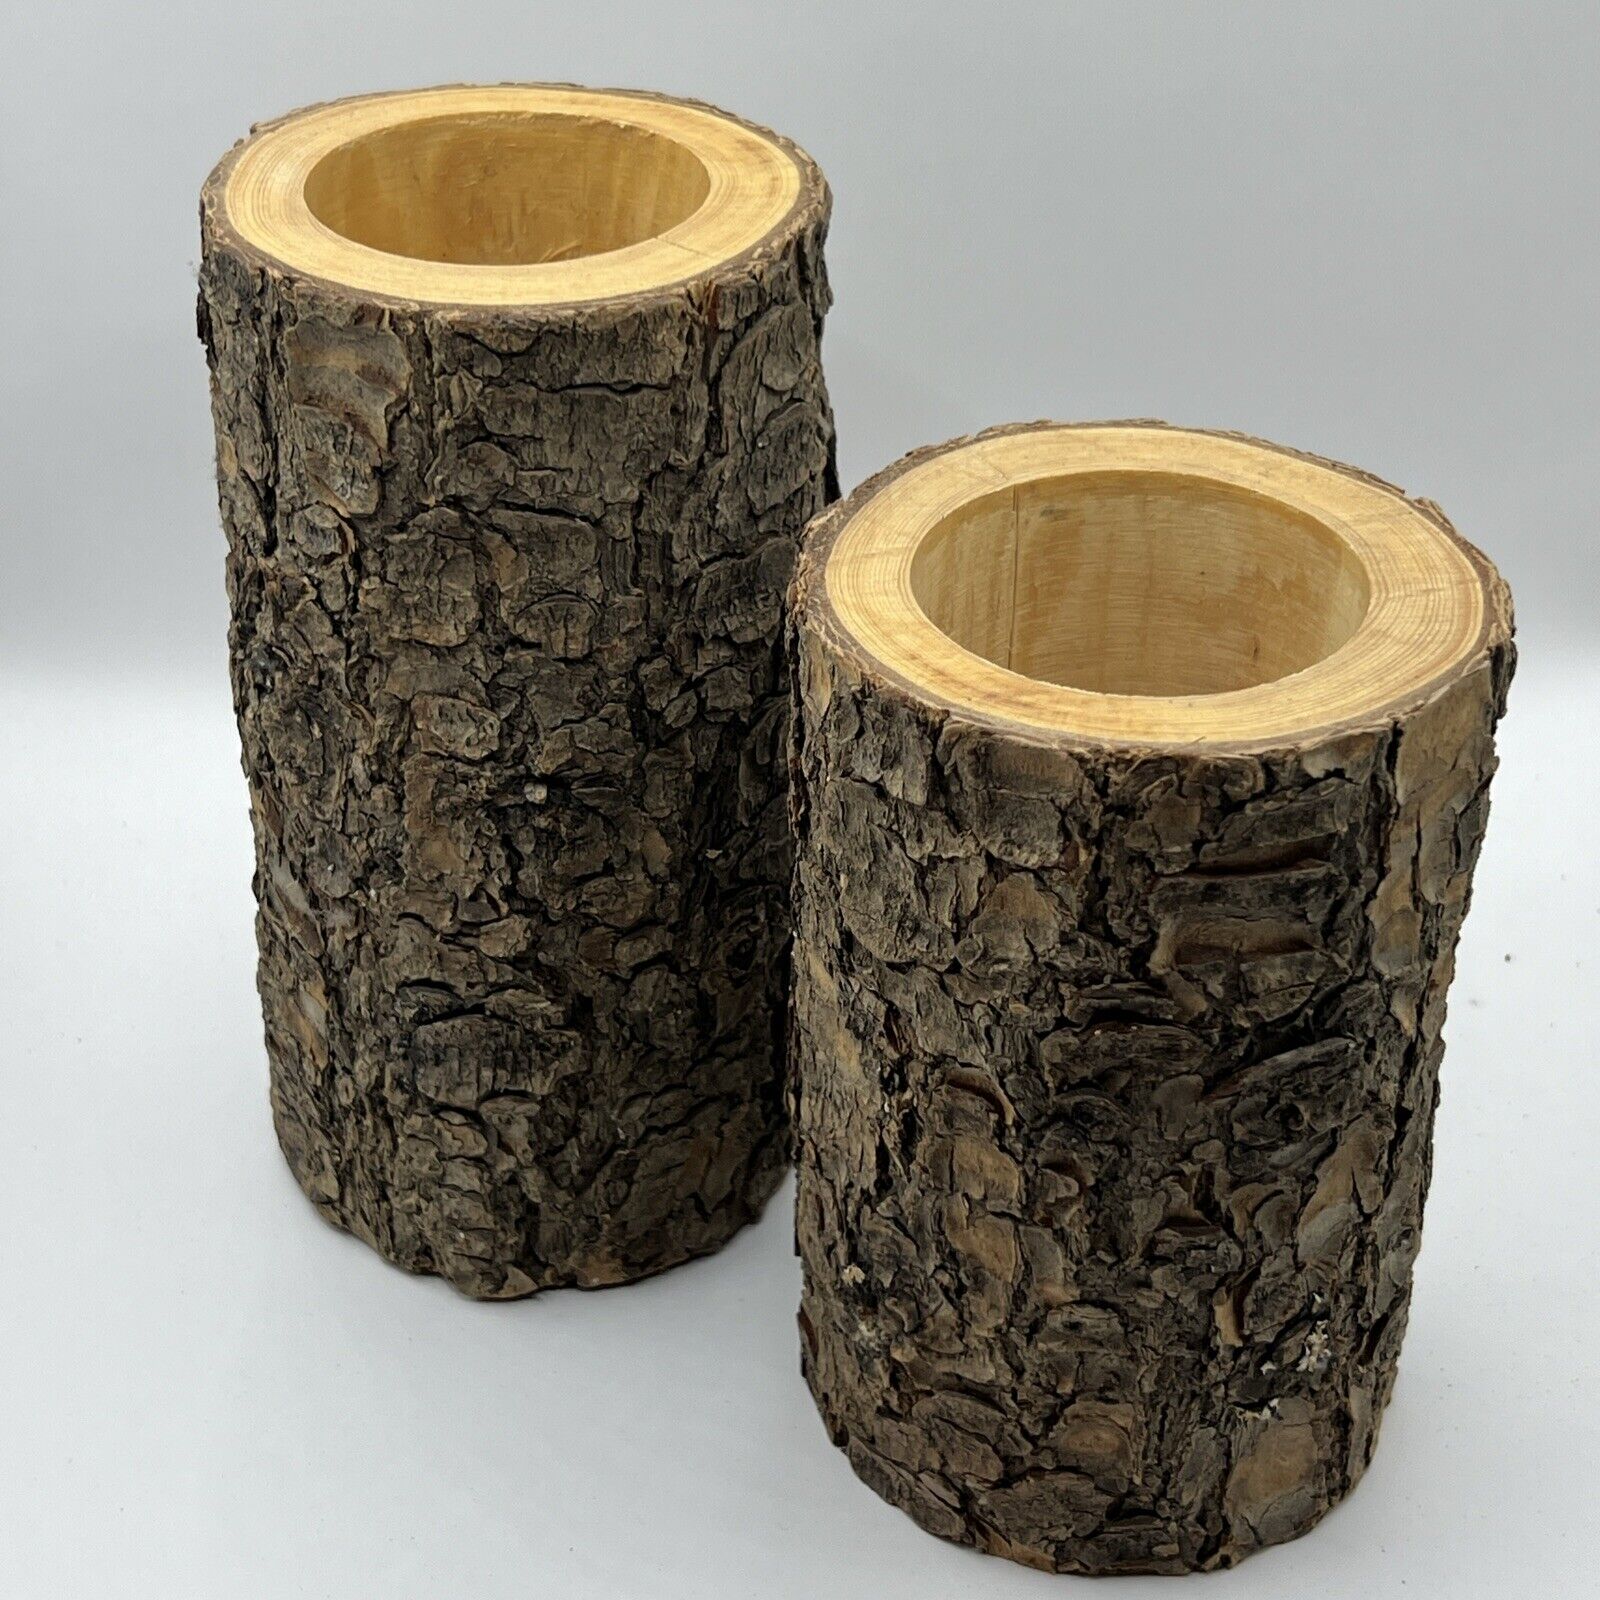 Handmade Real Wood Rustic Natural Tree Bark Candle Holders Vase Set of Two Lg/Md